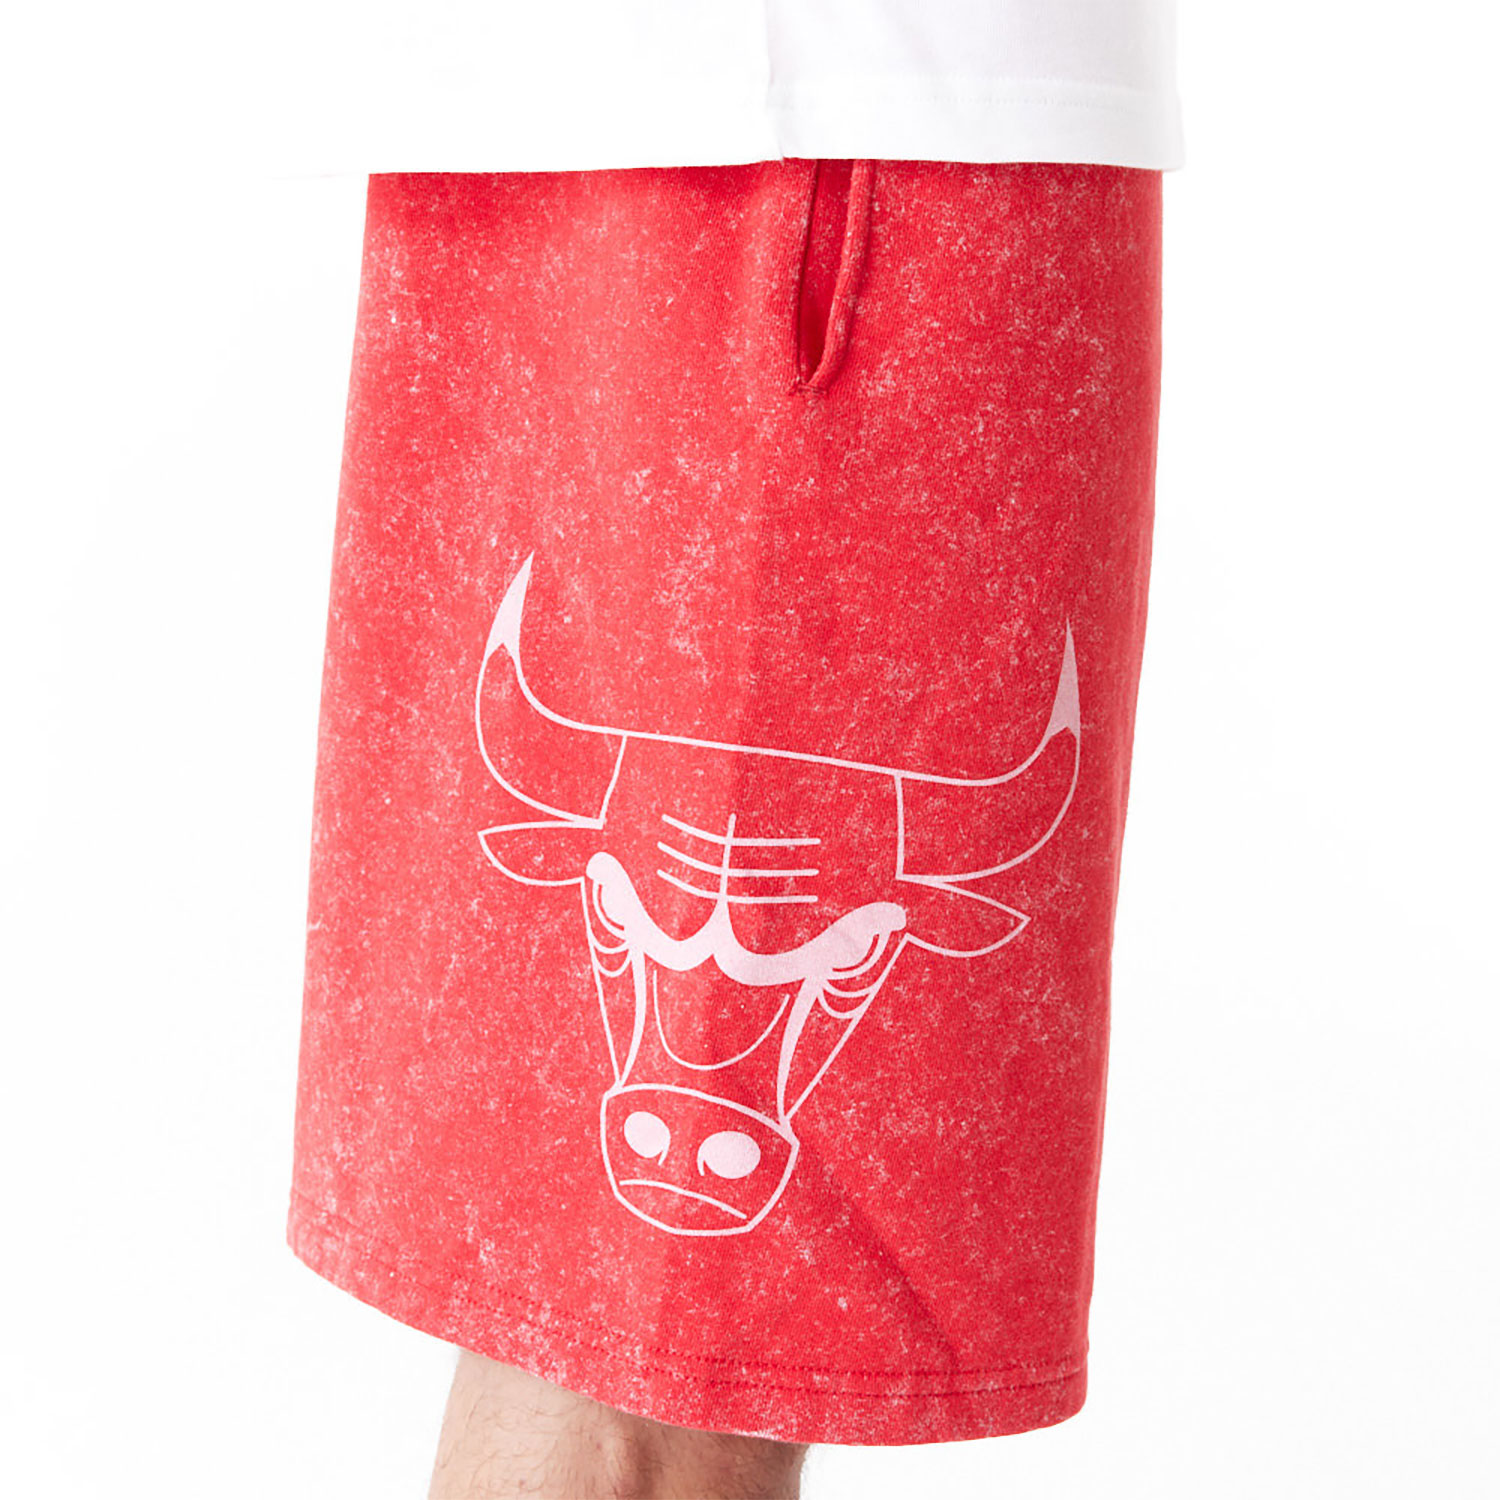 Chicago Bulls NBA Washed Red Shorts